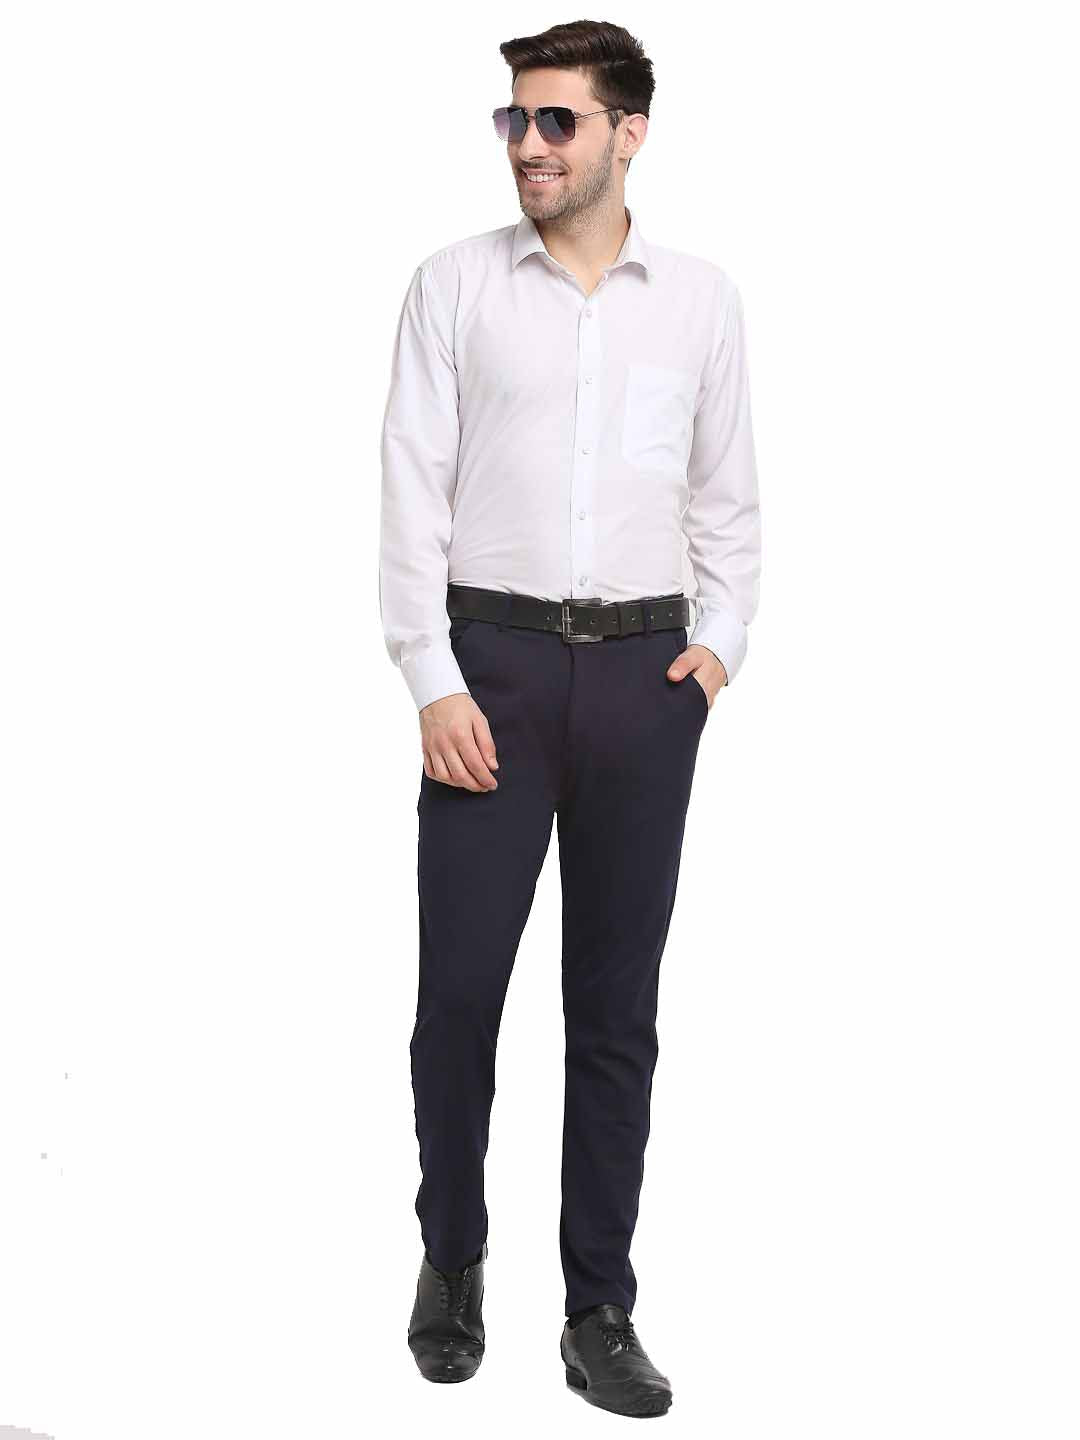 Men's Navy Blue 4-Way Lycra Tapered Fit Trousers ( FGP 269Navy ) - Jainish